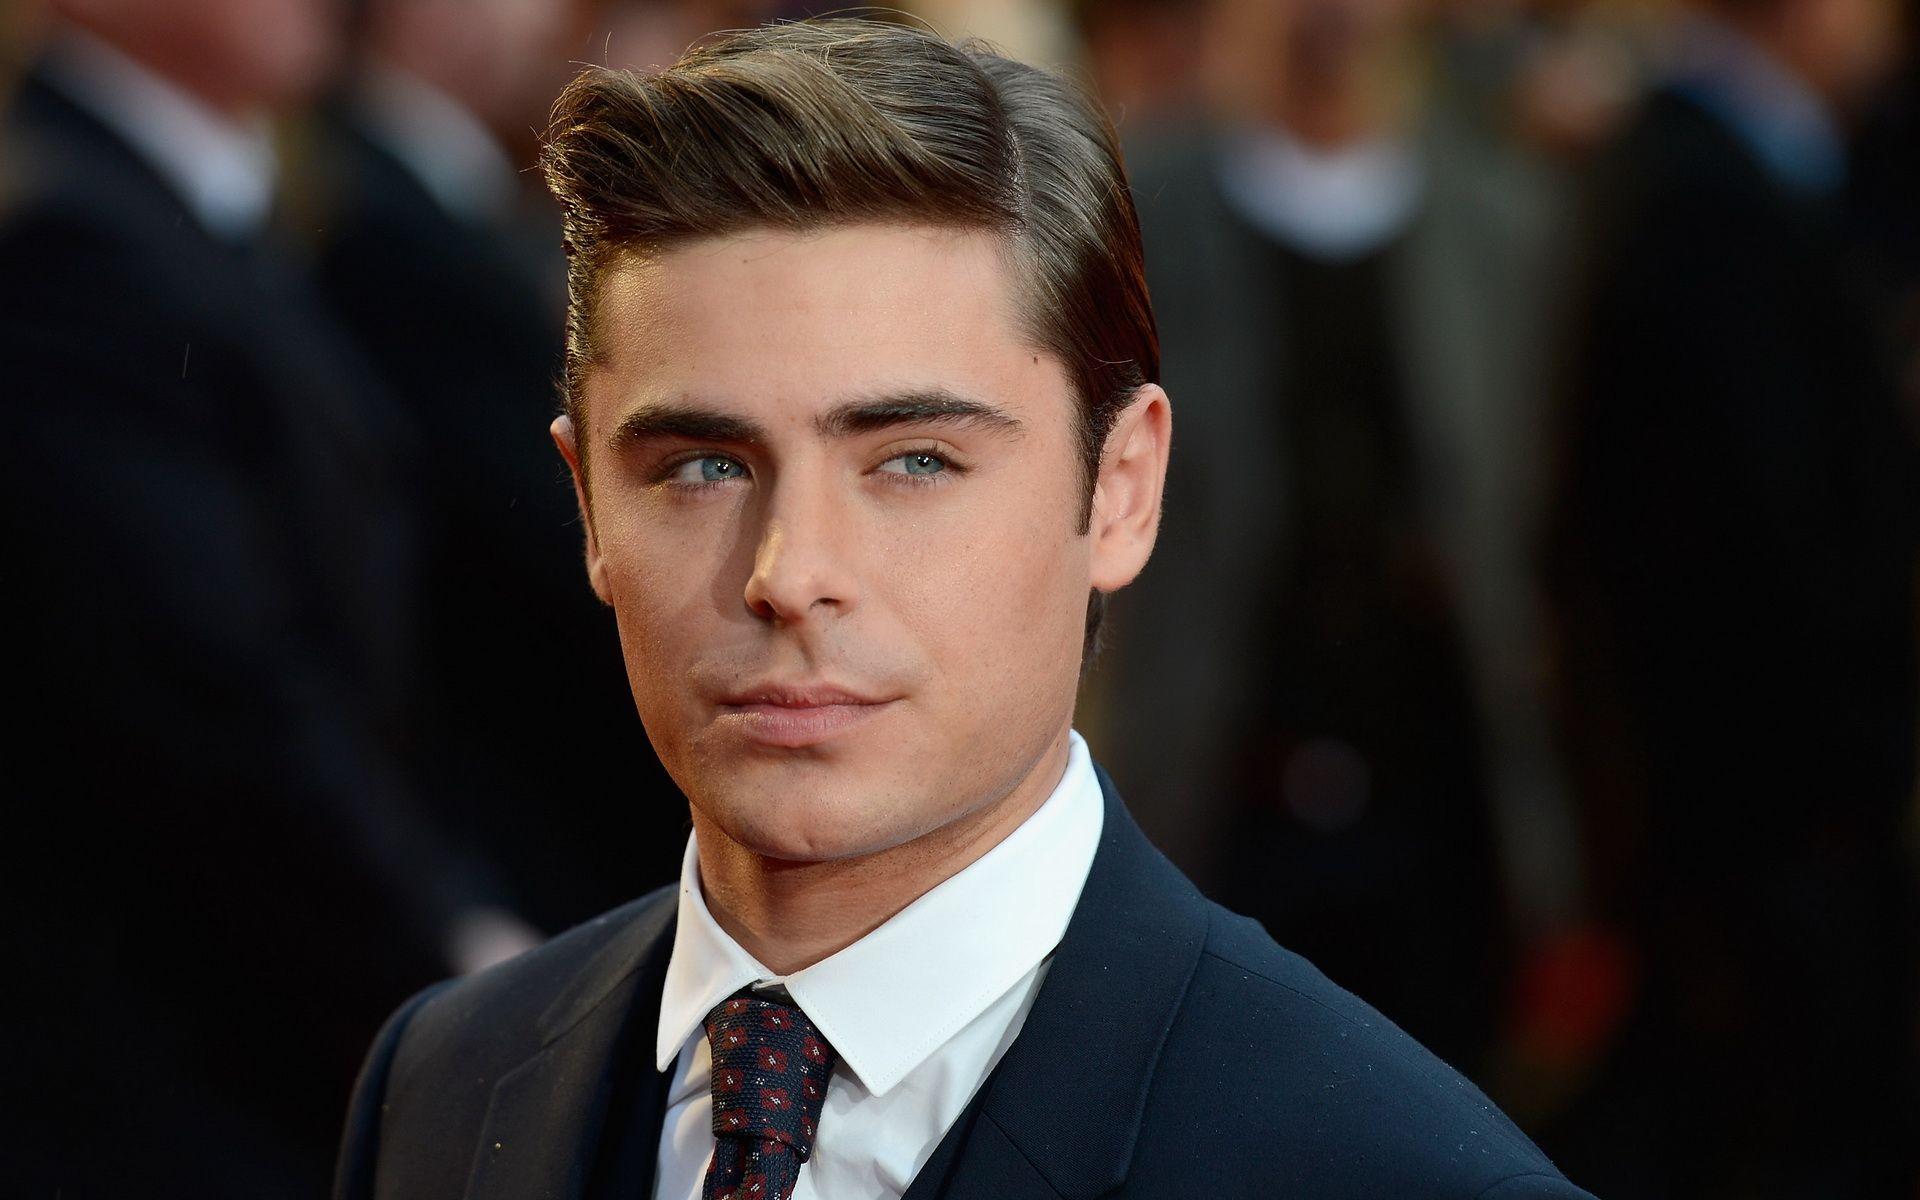 Zac Efron Hairstyles We Love!